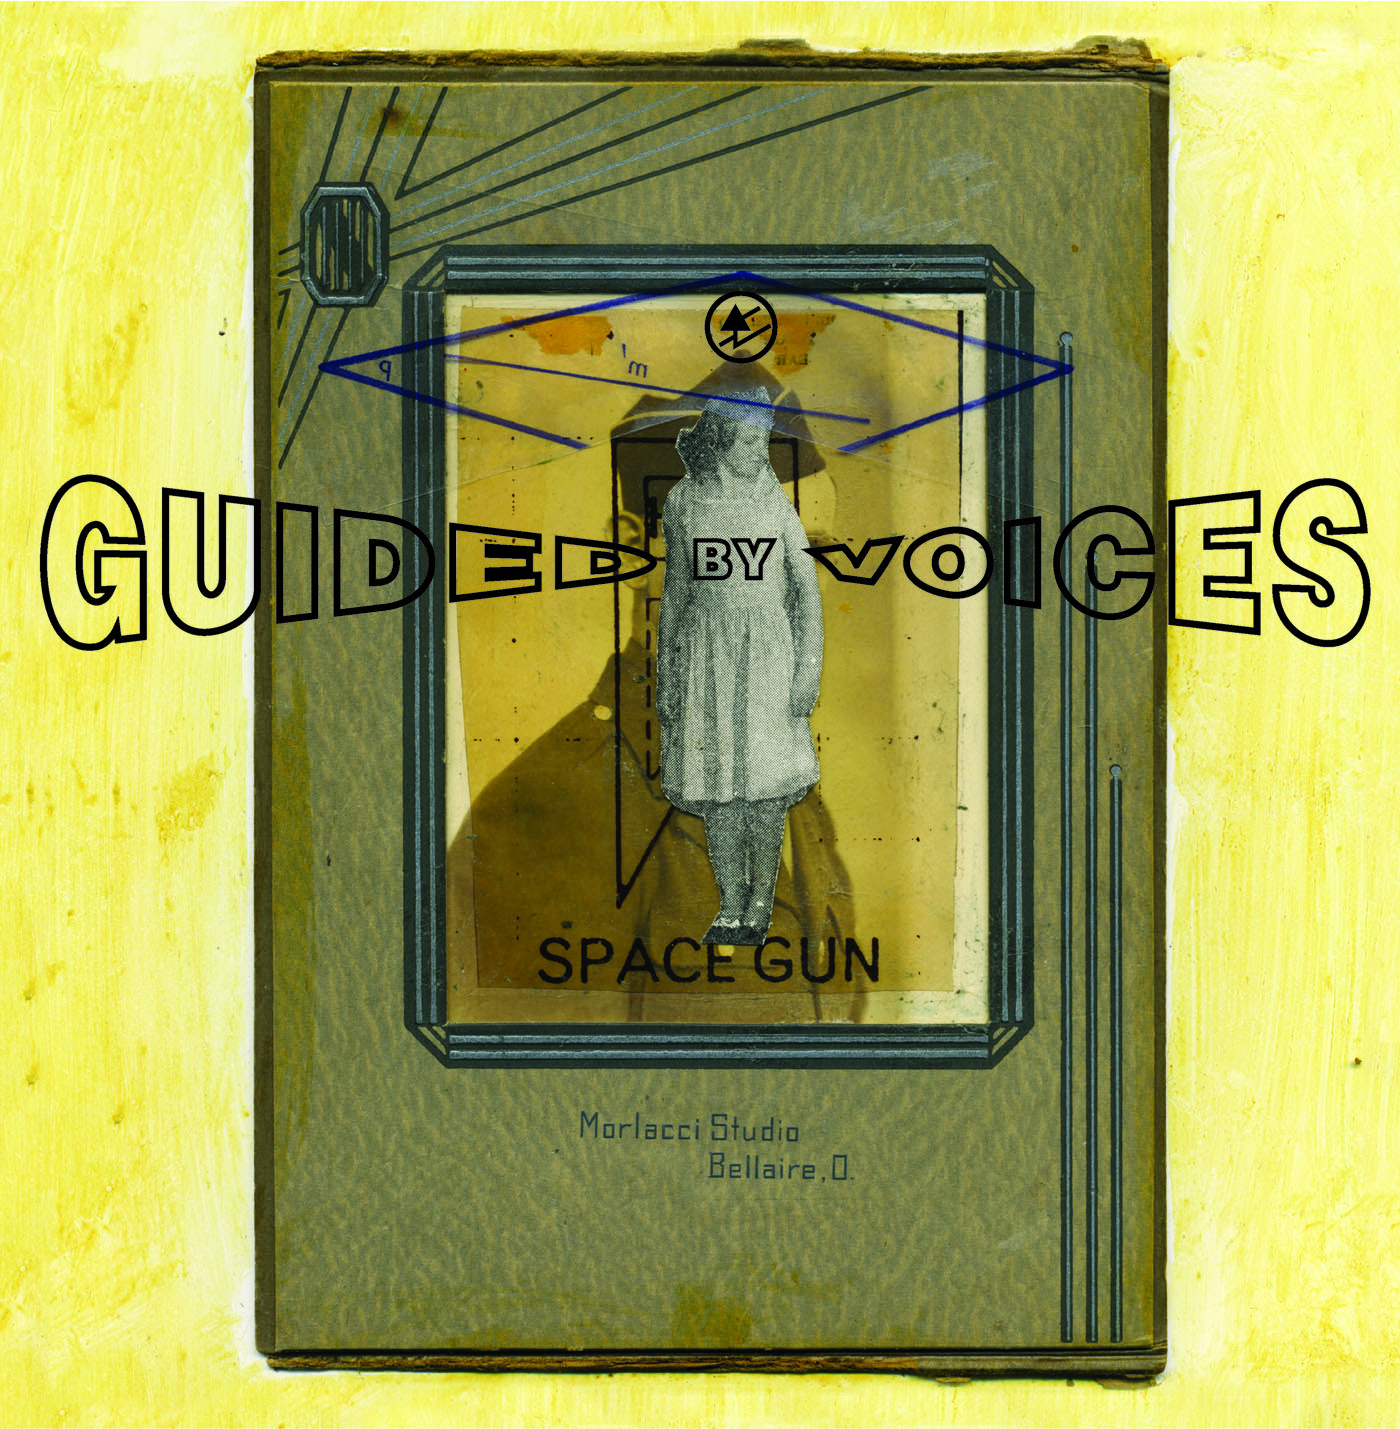 Guided By Voices Announce New Album <i>Space Gun</i>, Share Title Track” title=”Print” data-original-id=”269480″ data-adjusted-id=”269480″ class=”sm_size_full_width sm_alignment_center ” data-image-source=”getty” />
<p><strong><i>Space Gun</i> Tracklist:</strong><br />
01. Space Gun<br />
02. Colonel Paper<br />
03. King Flute<br />
04. Ark Technican<br />
05. See My Field<br />
06. Liar’s Box<br />
07. Blink Bank<br />
08. Daily Get Ups<br />
09. Hudson Rake<br />
10. Sport Component National<br />
11. I Love Kangaroos<br />
12. Grey Spat Matters<br />
13. That’s Good<br />
14. Flight Advantage<br />
15. Evolution Circus</p>
</p>		</div>
				</div>
						</div>
					</div>
		</div>
								</div>
					</div>
		</section>
				<section data-particle_enable=